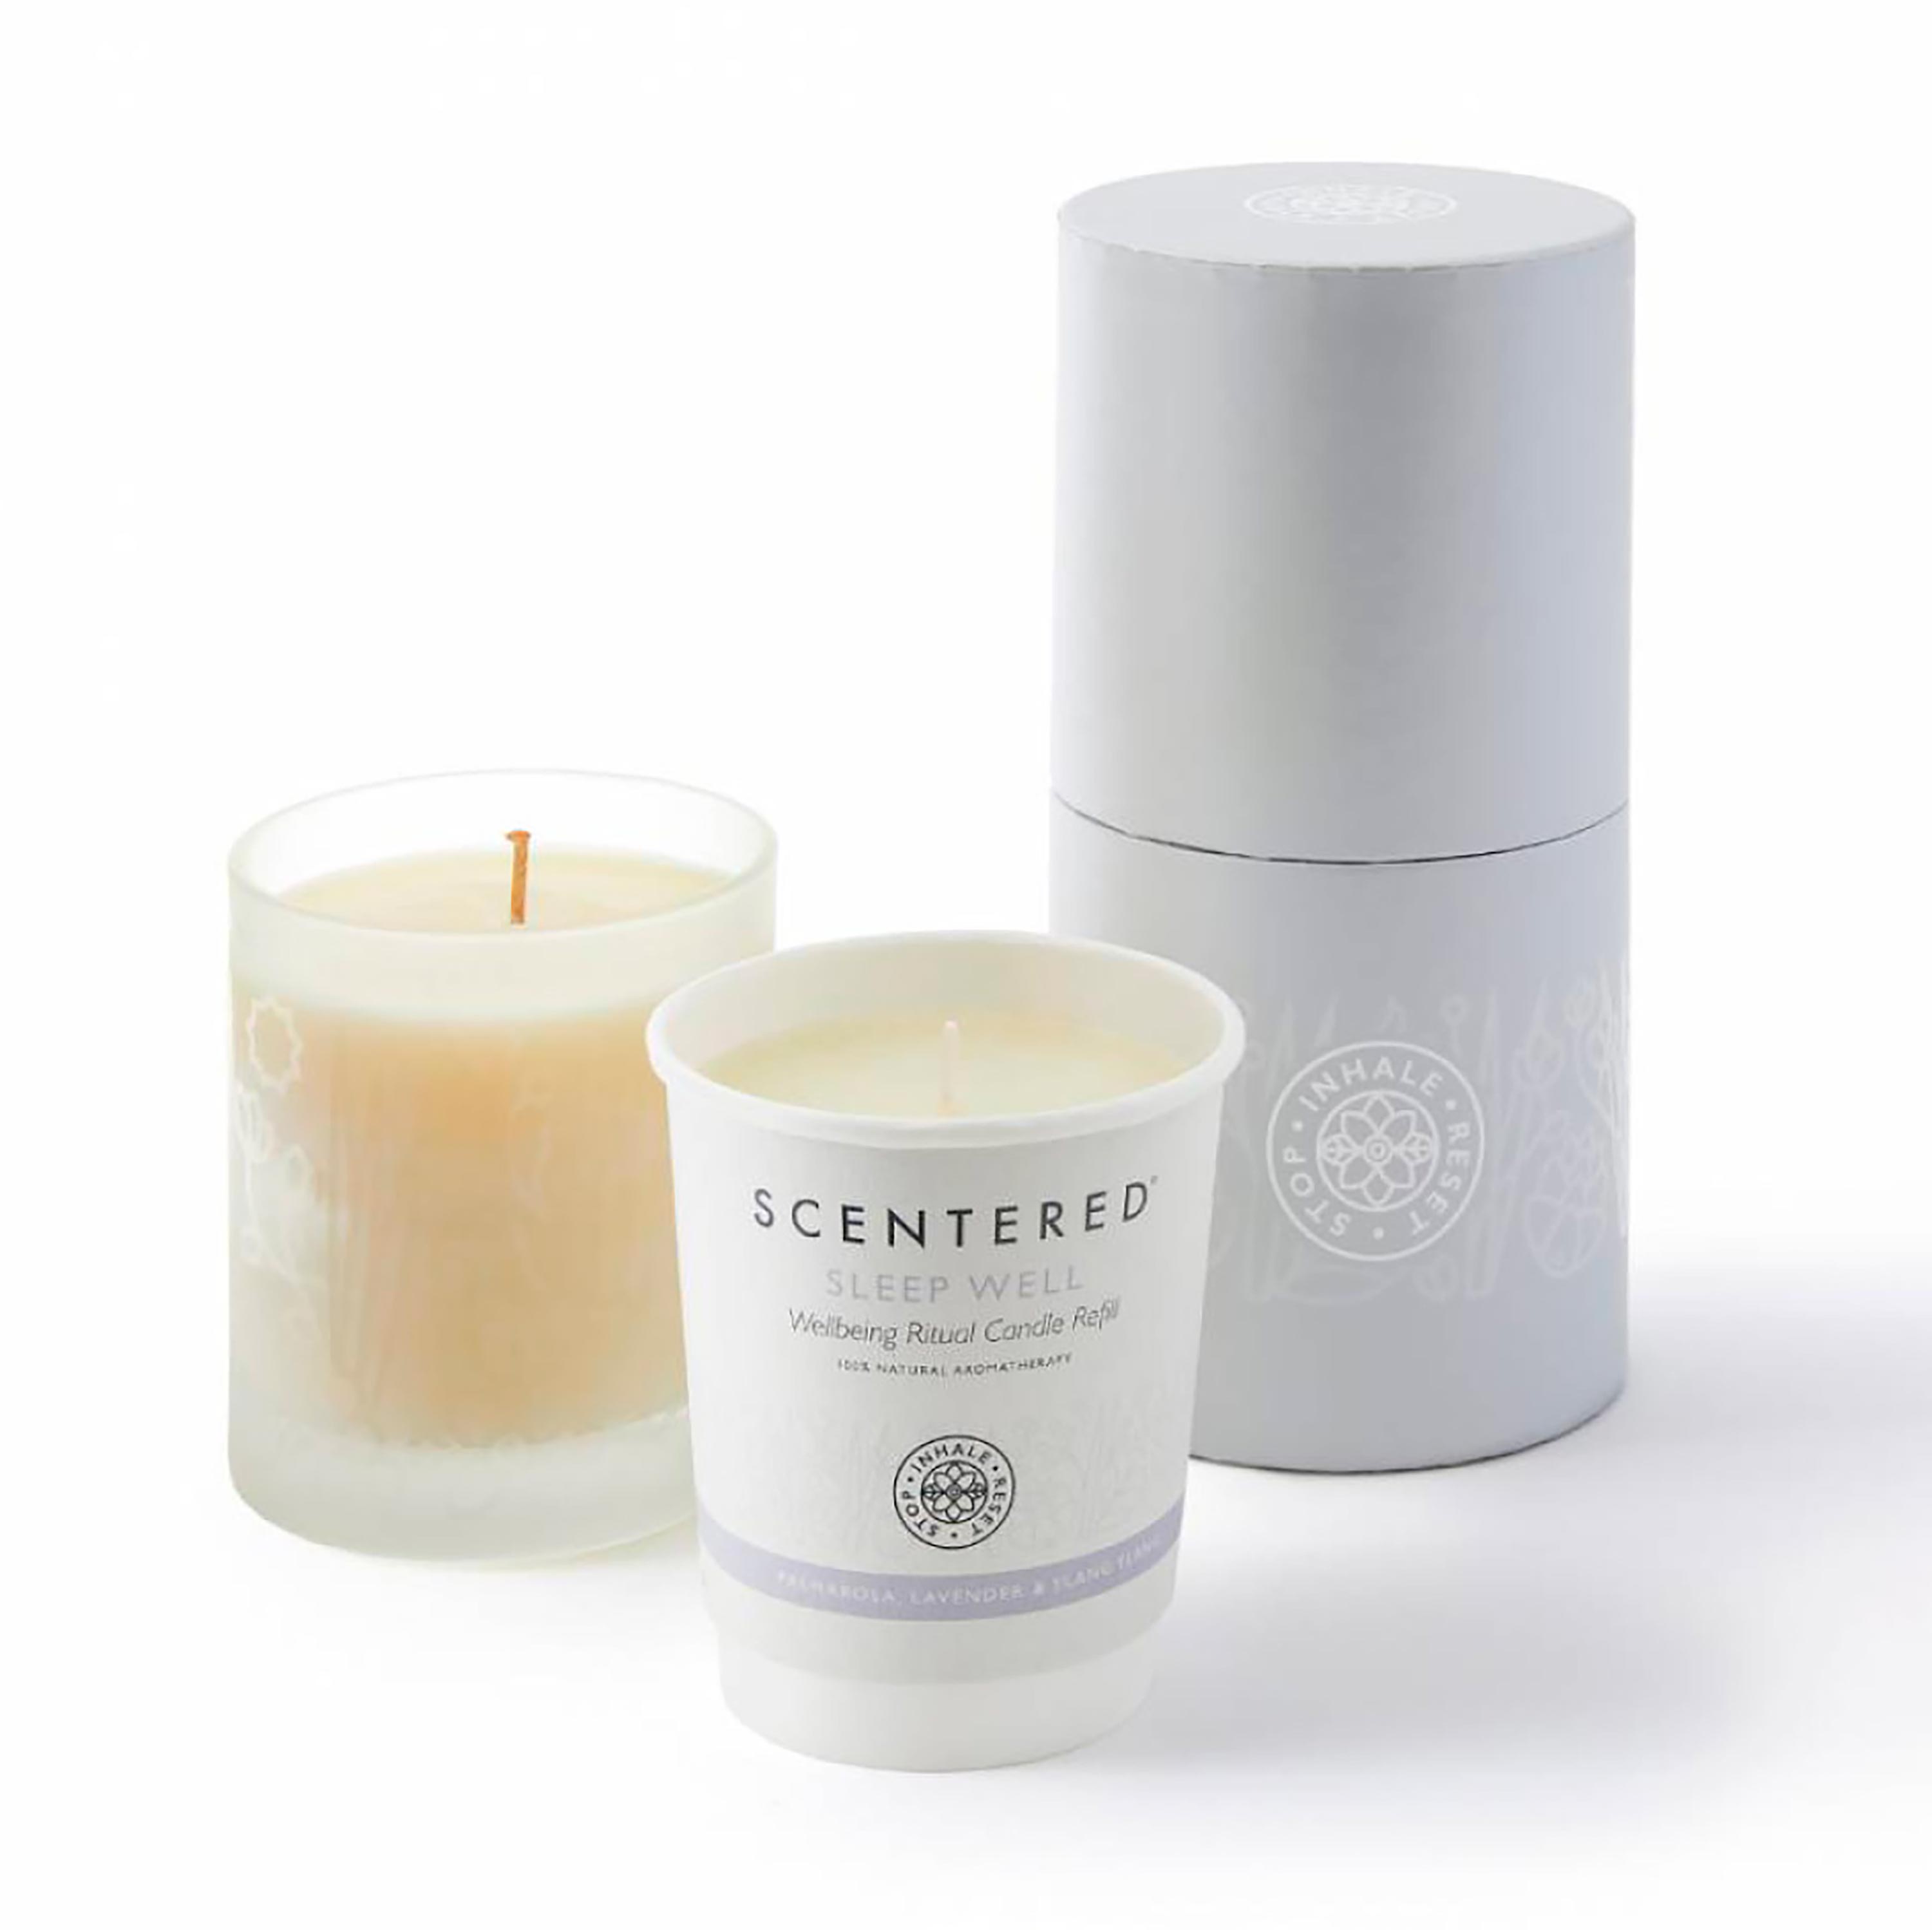 Aromatherapy Wellbeing Ritual Candle and Refill - De-Stress